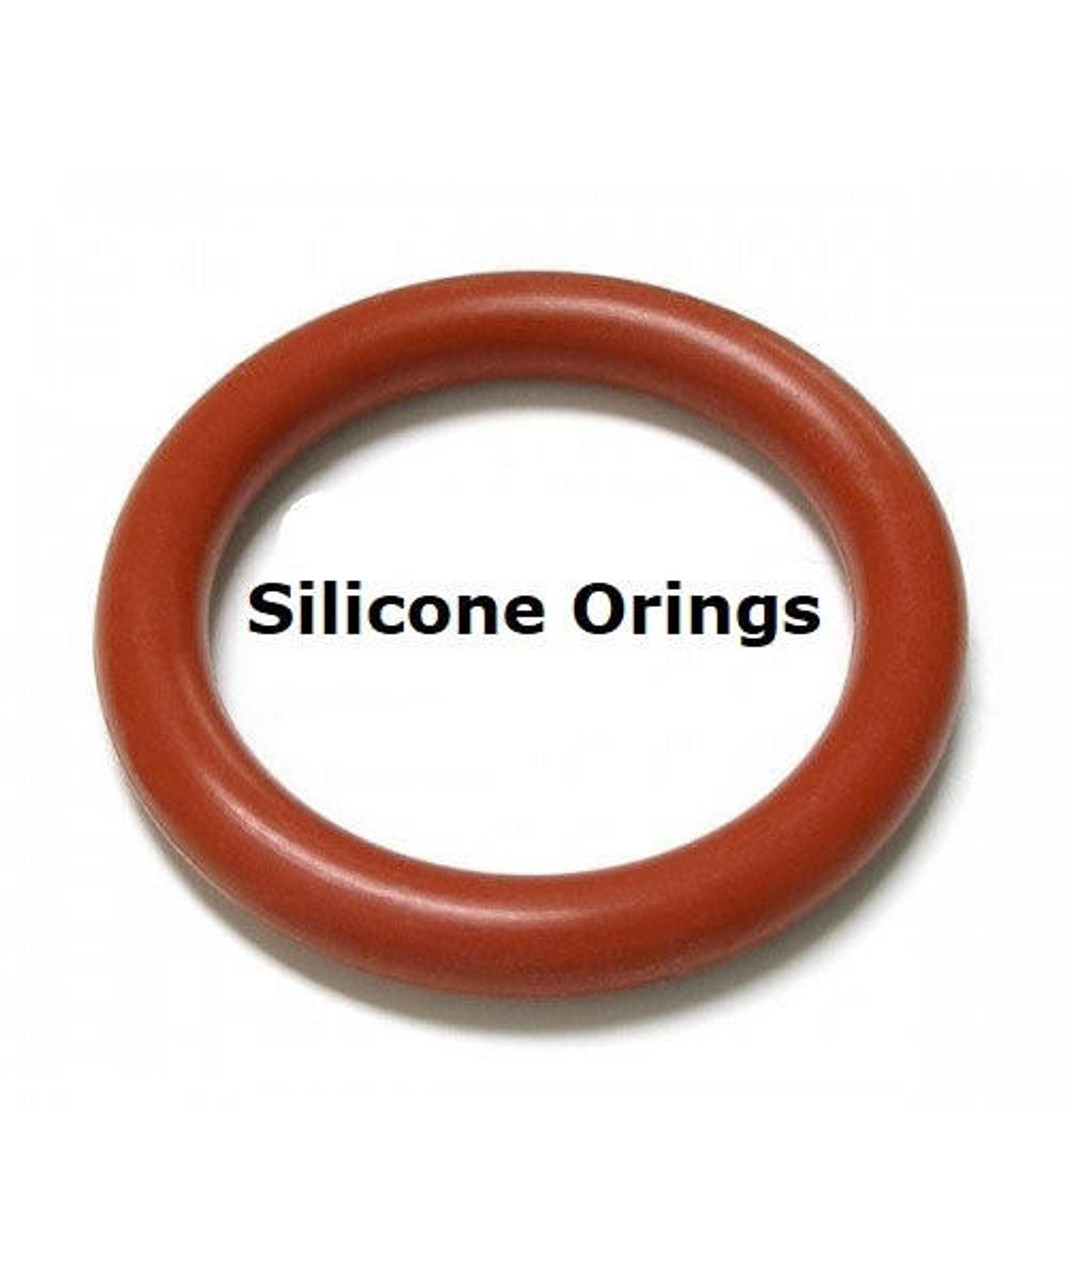 Silicone O-rings Size 395 Price for 1 pc